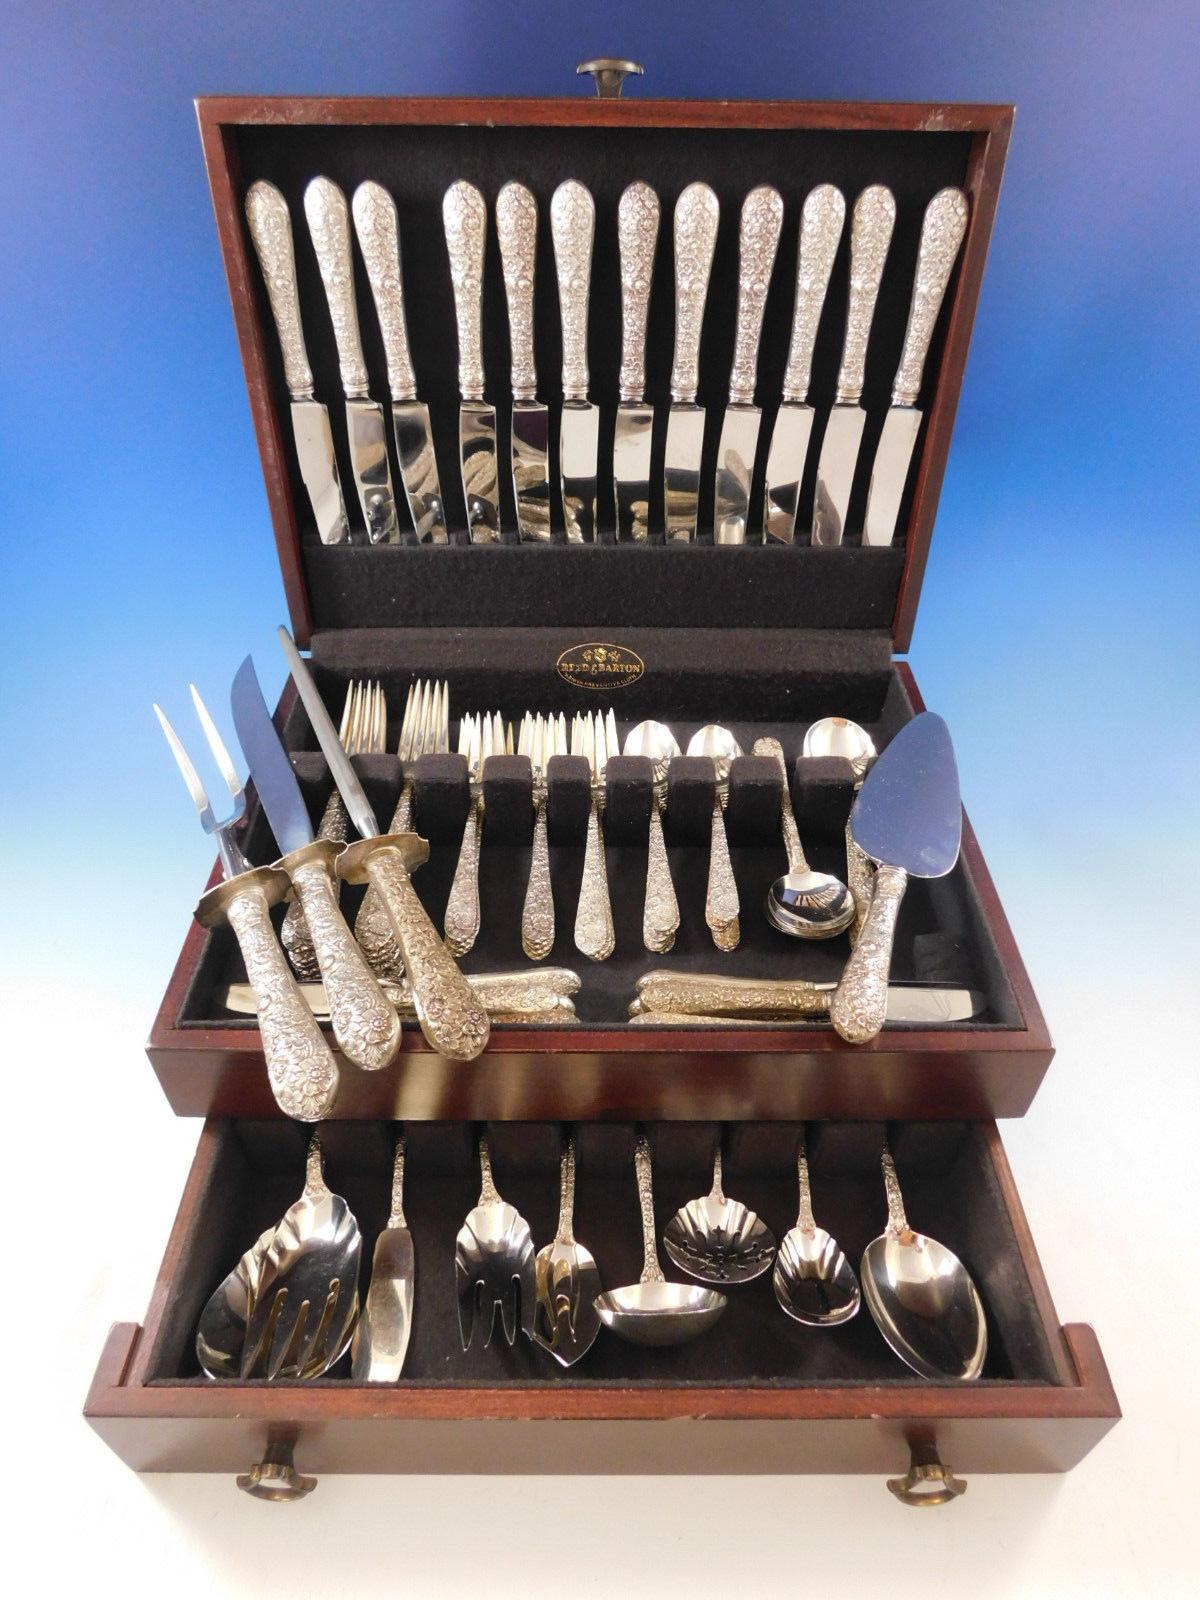 Dinner Size Bridal Bouquet by Alvin repoussed sterling silver Flatware set - 86 pieces.This set includes:

12 dinner size knives, 9 5/8